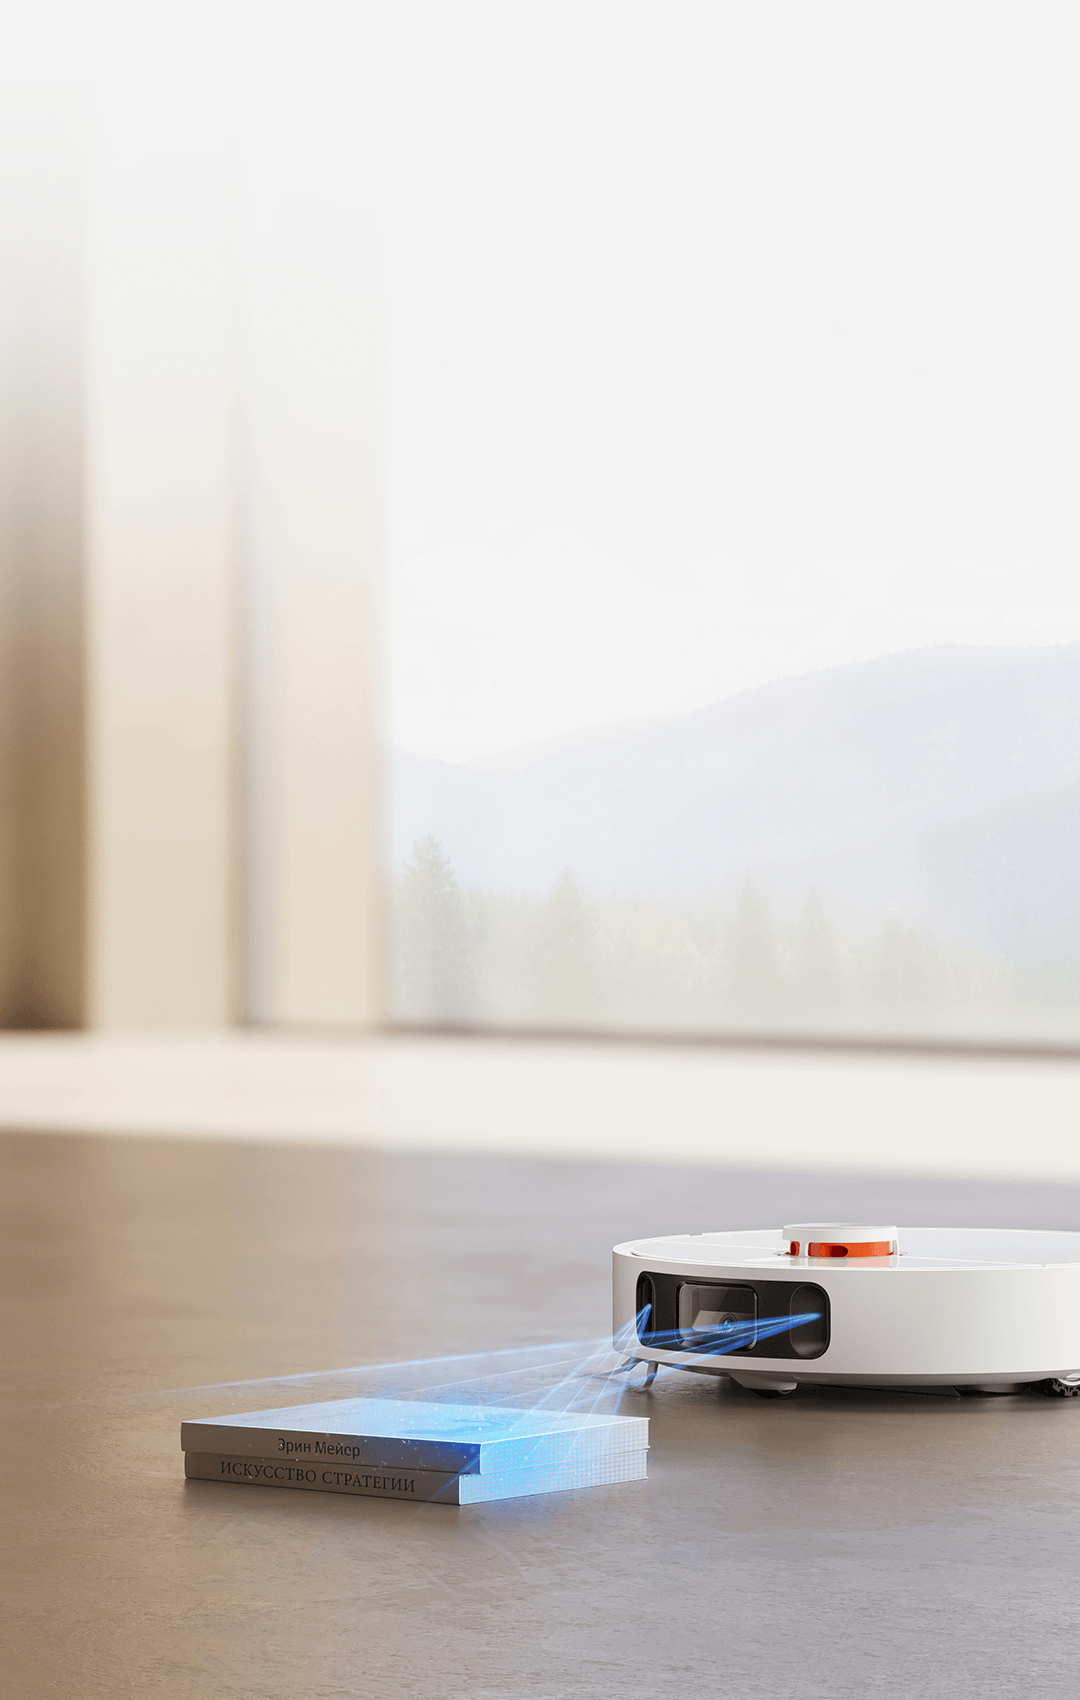 Xiaomi Robot Vacuum X10 : It became available in Europe and Greece - News  by Xiaomi Miui Hellas